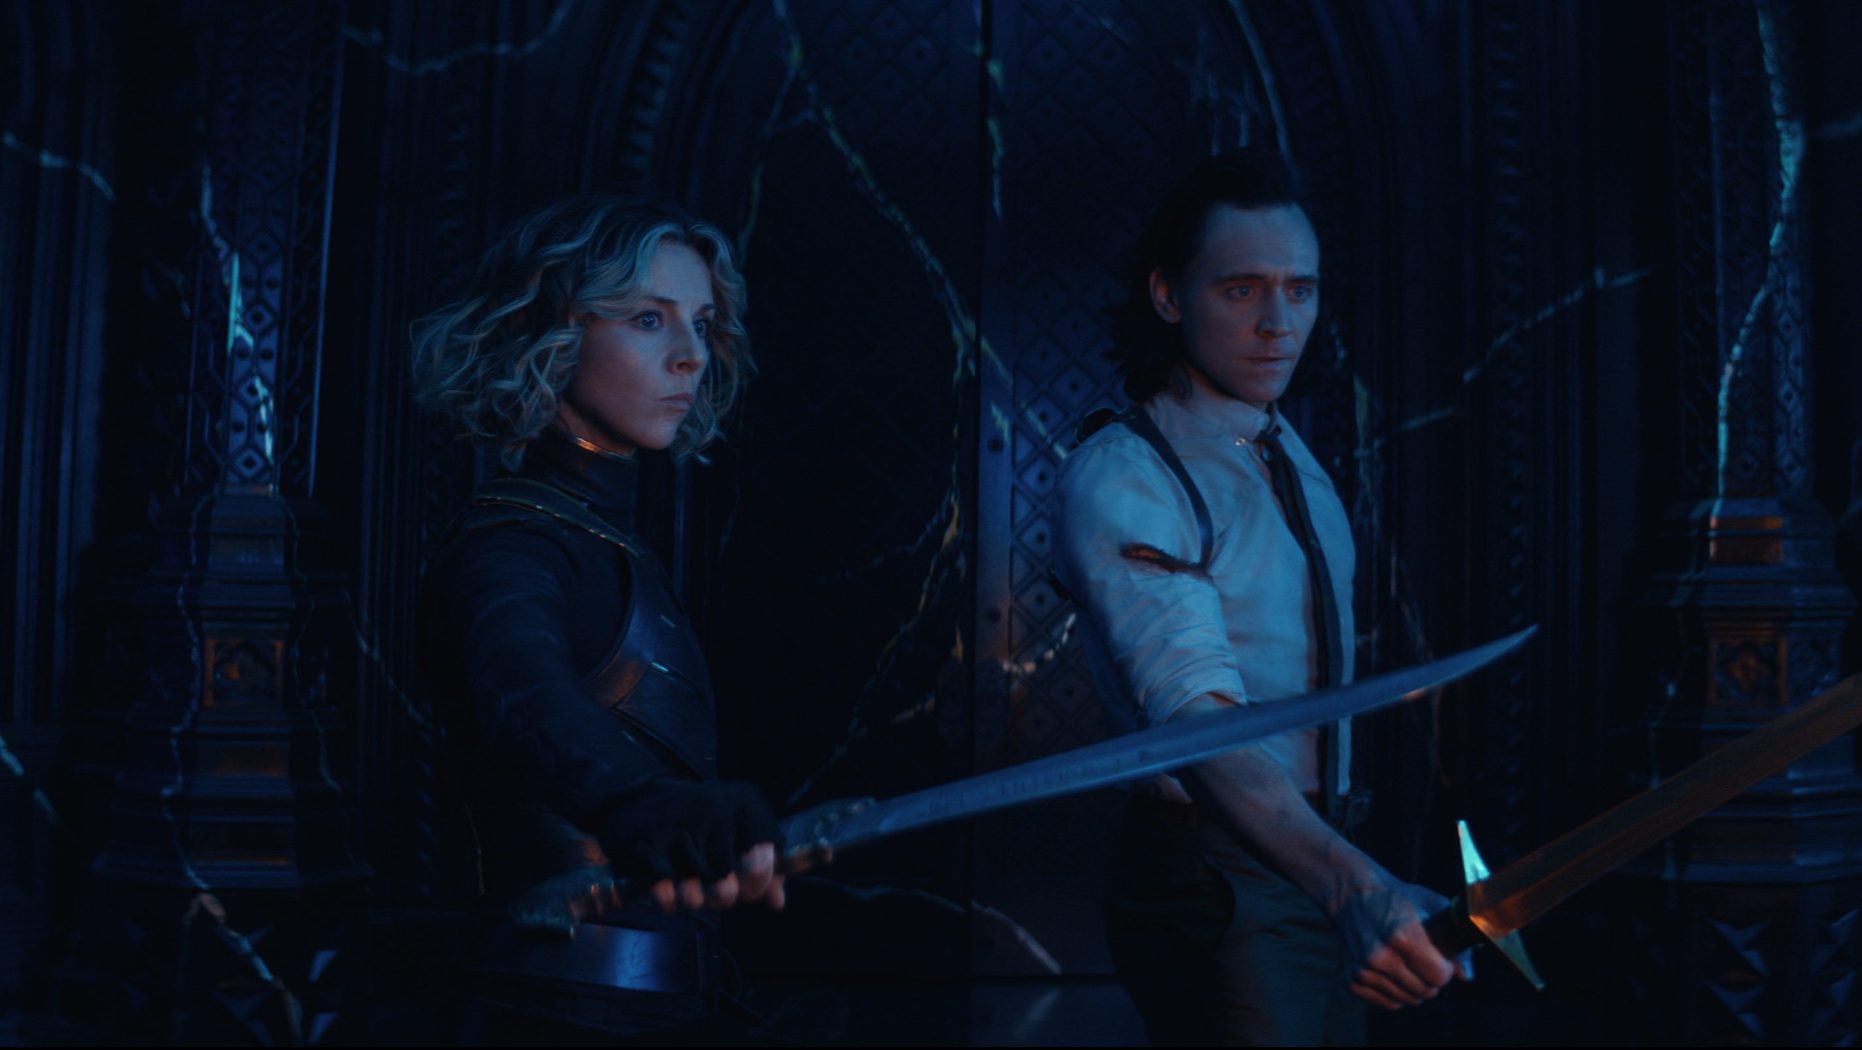 Loki (Tom Hiddleston) and Sylvie (Sophia Di Martino) holding out knives and learning who's behind the TVA, leaving questions for Loki Season 2